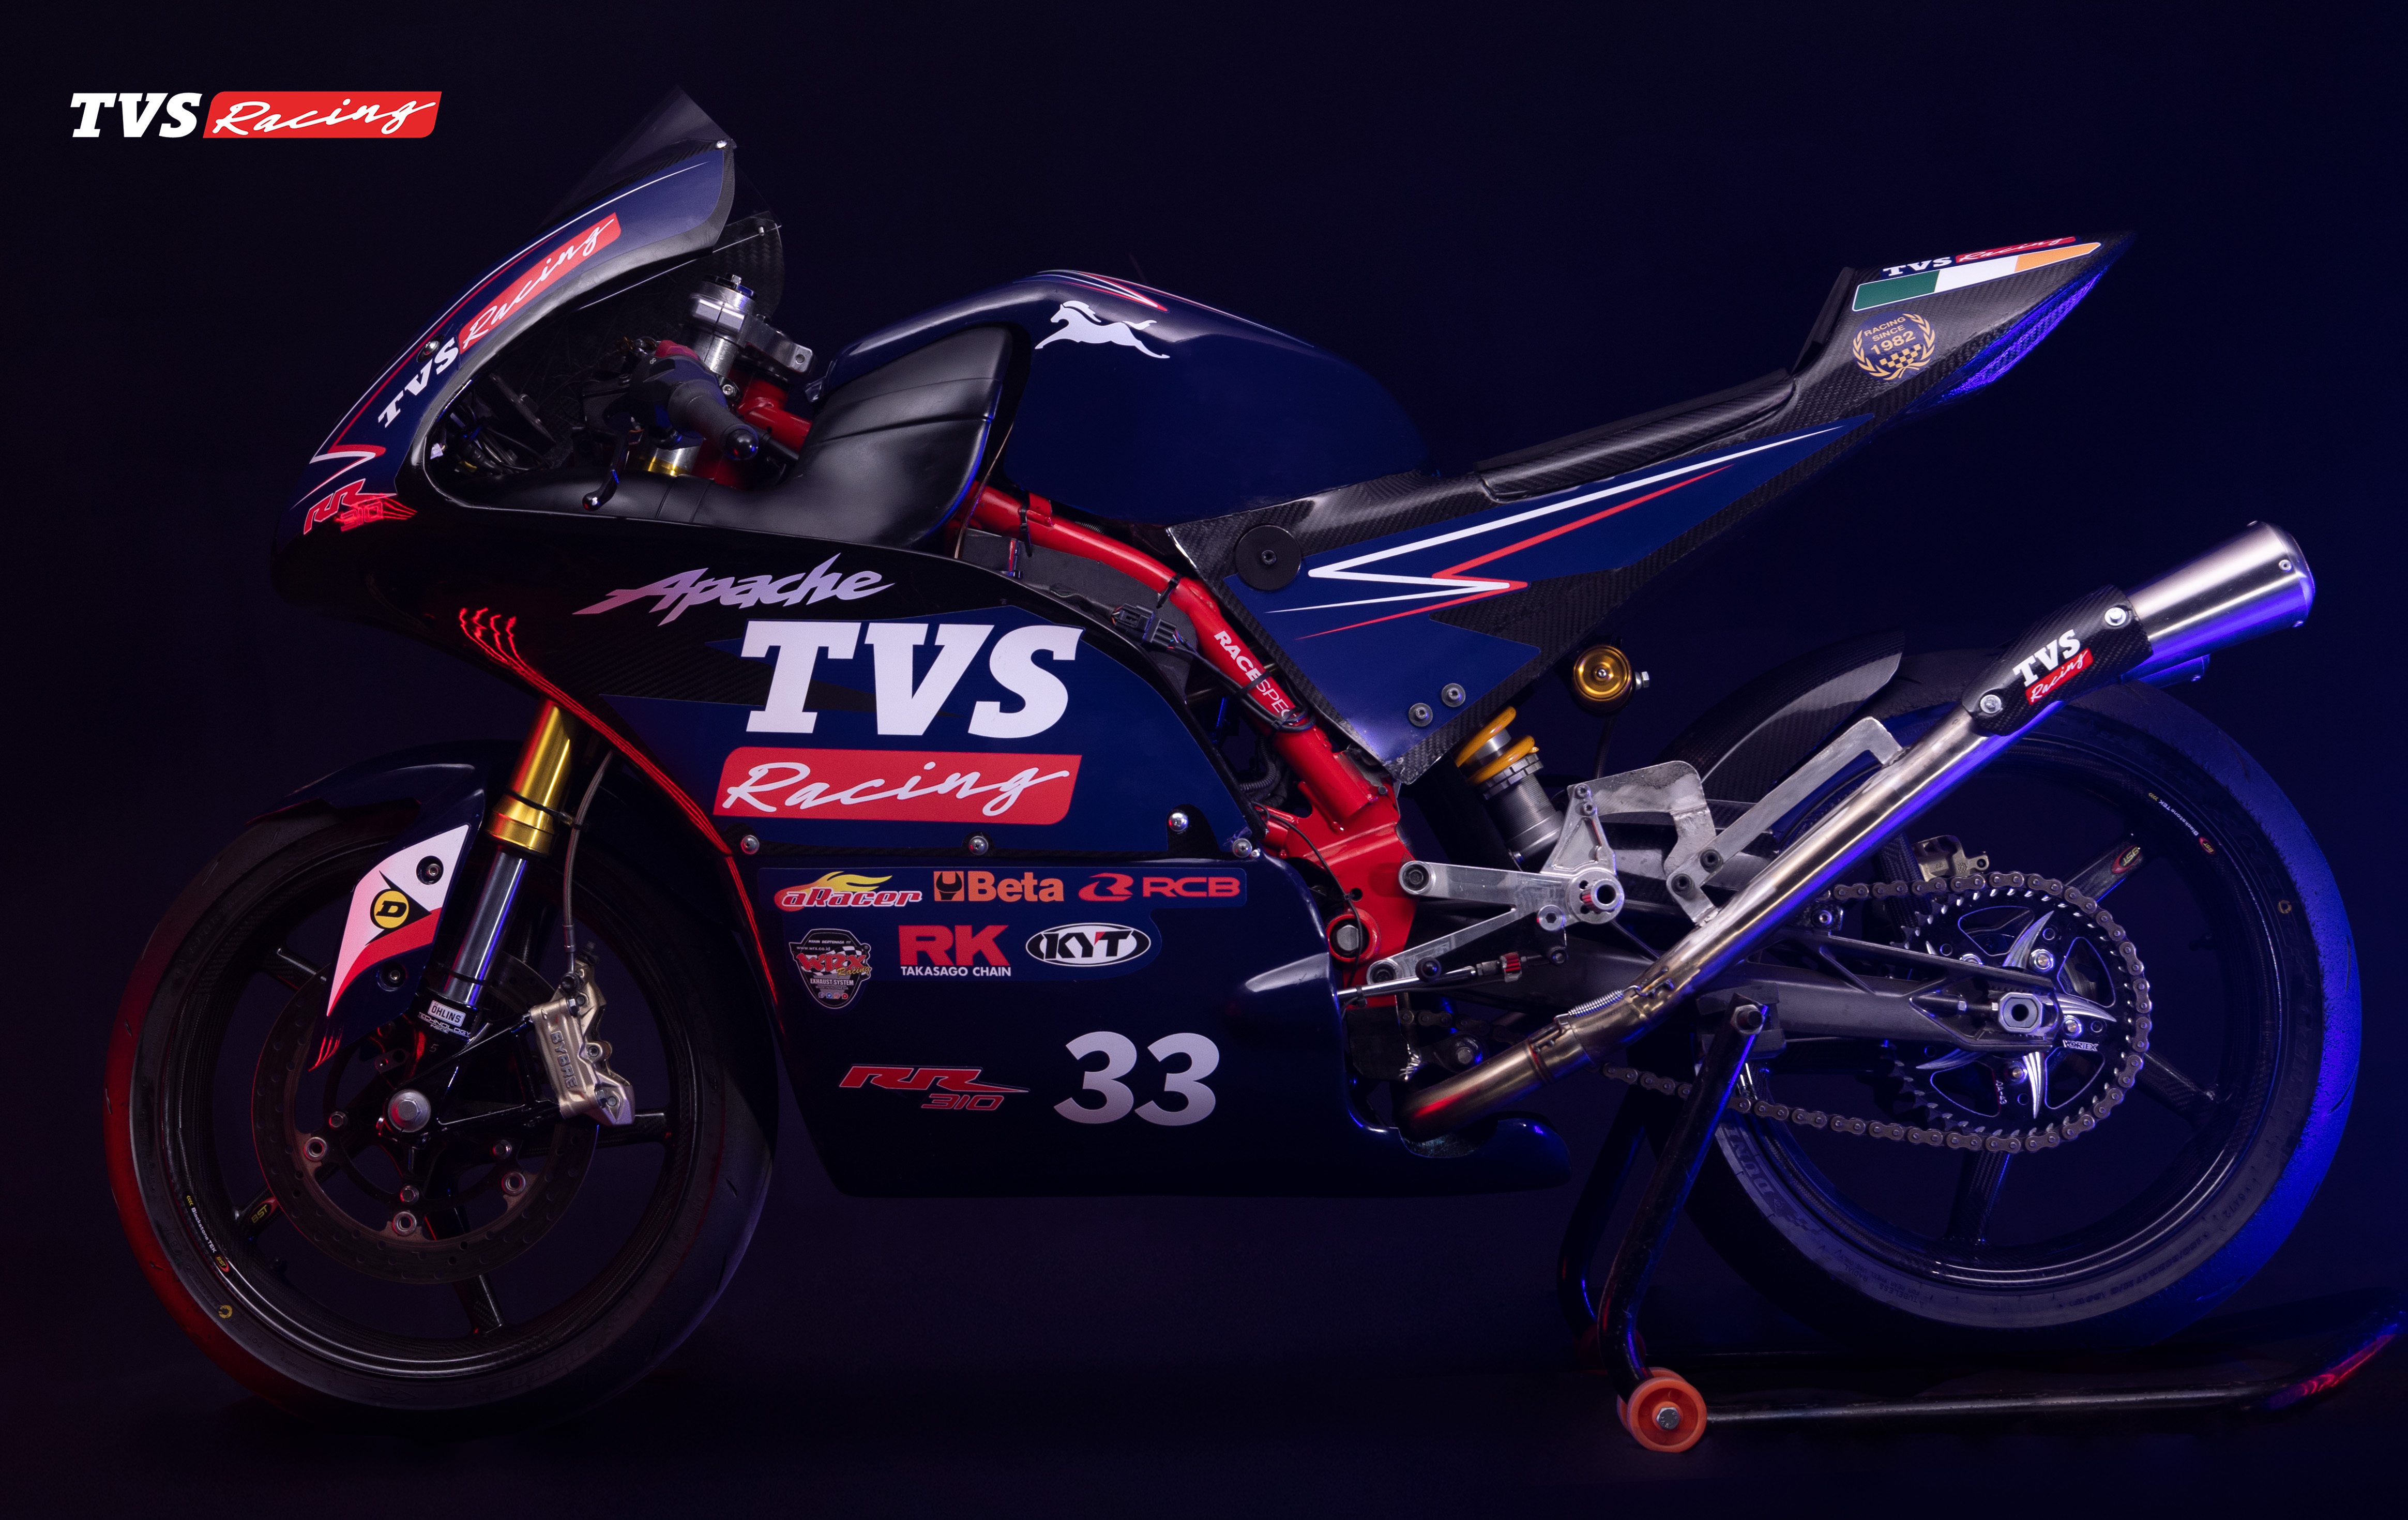 TVS Racing strengthens its international footprint; readies its factory racers for the first-ever TVS Asia One Make Championship, globally